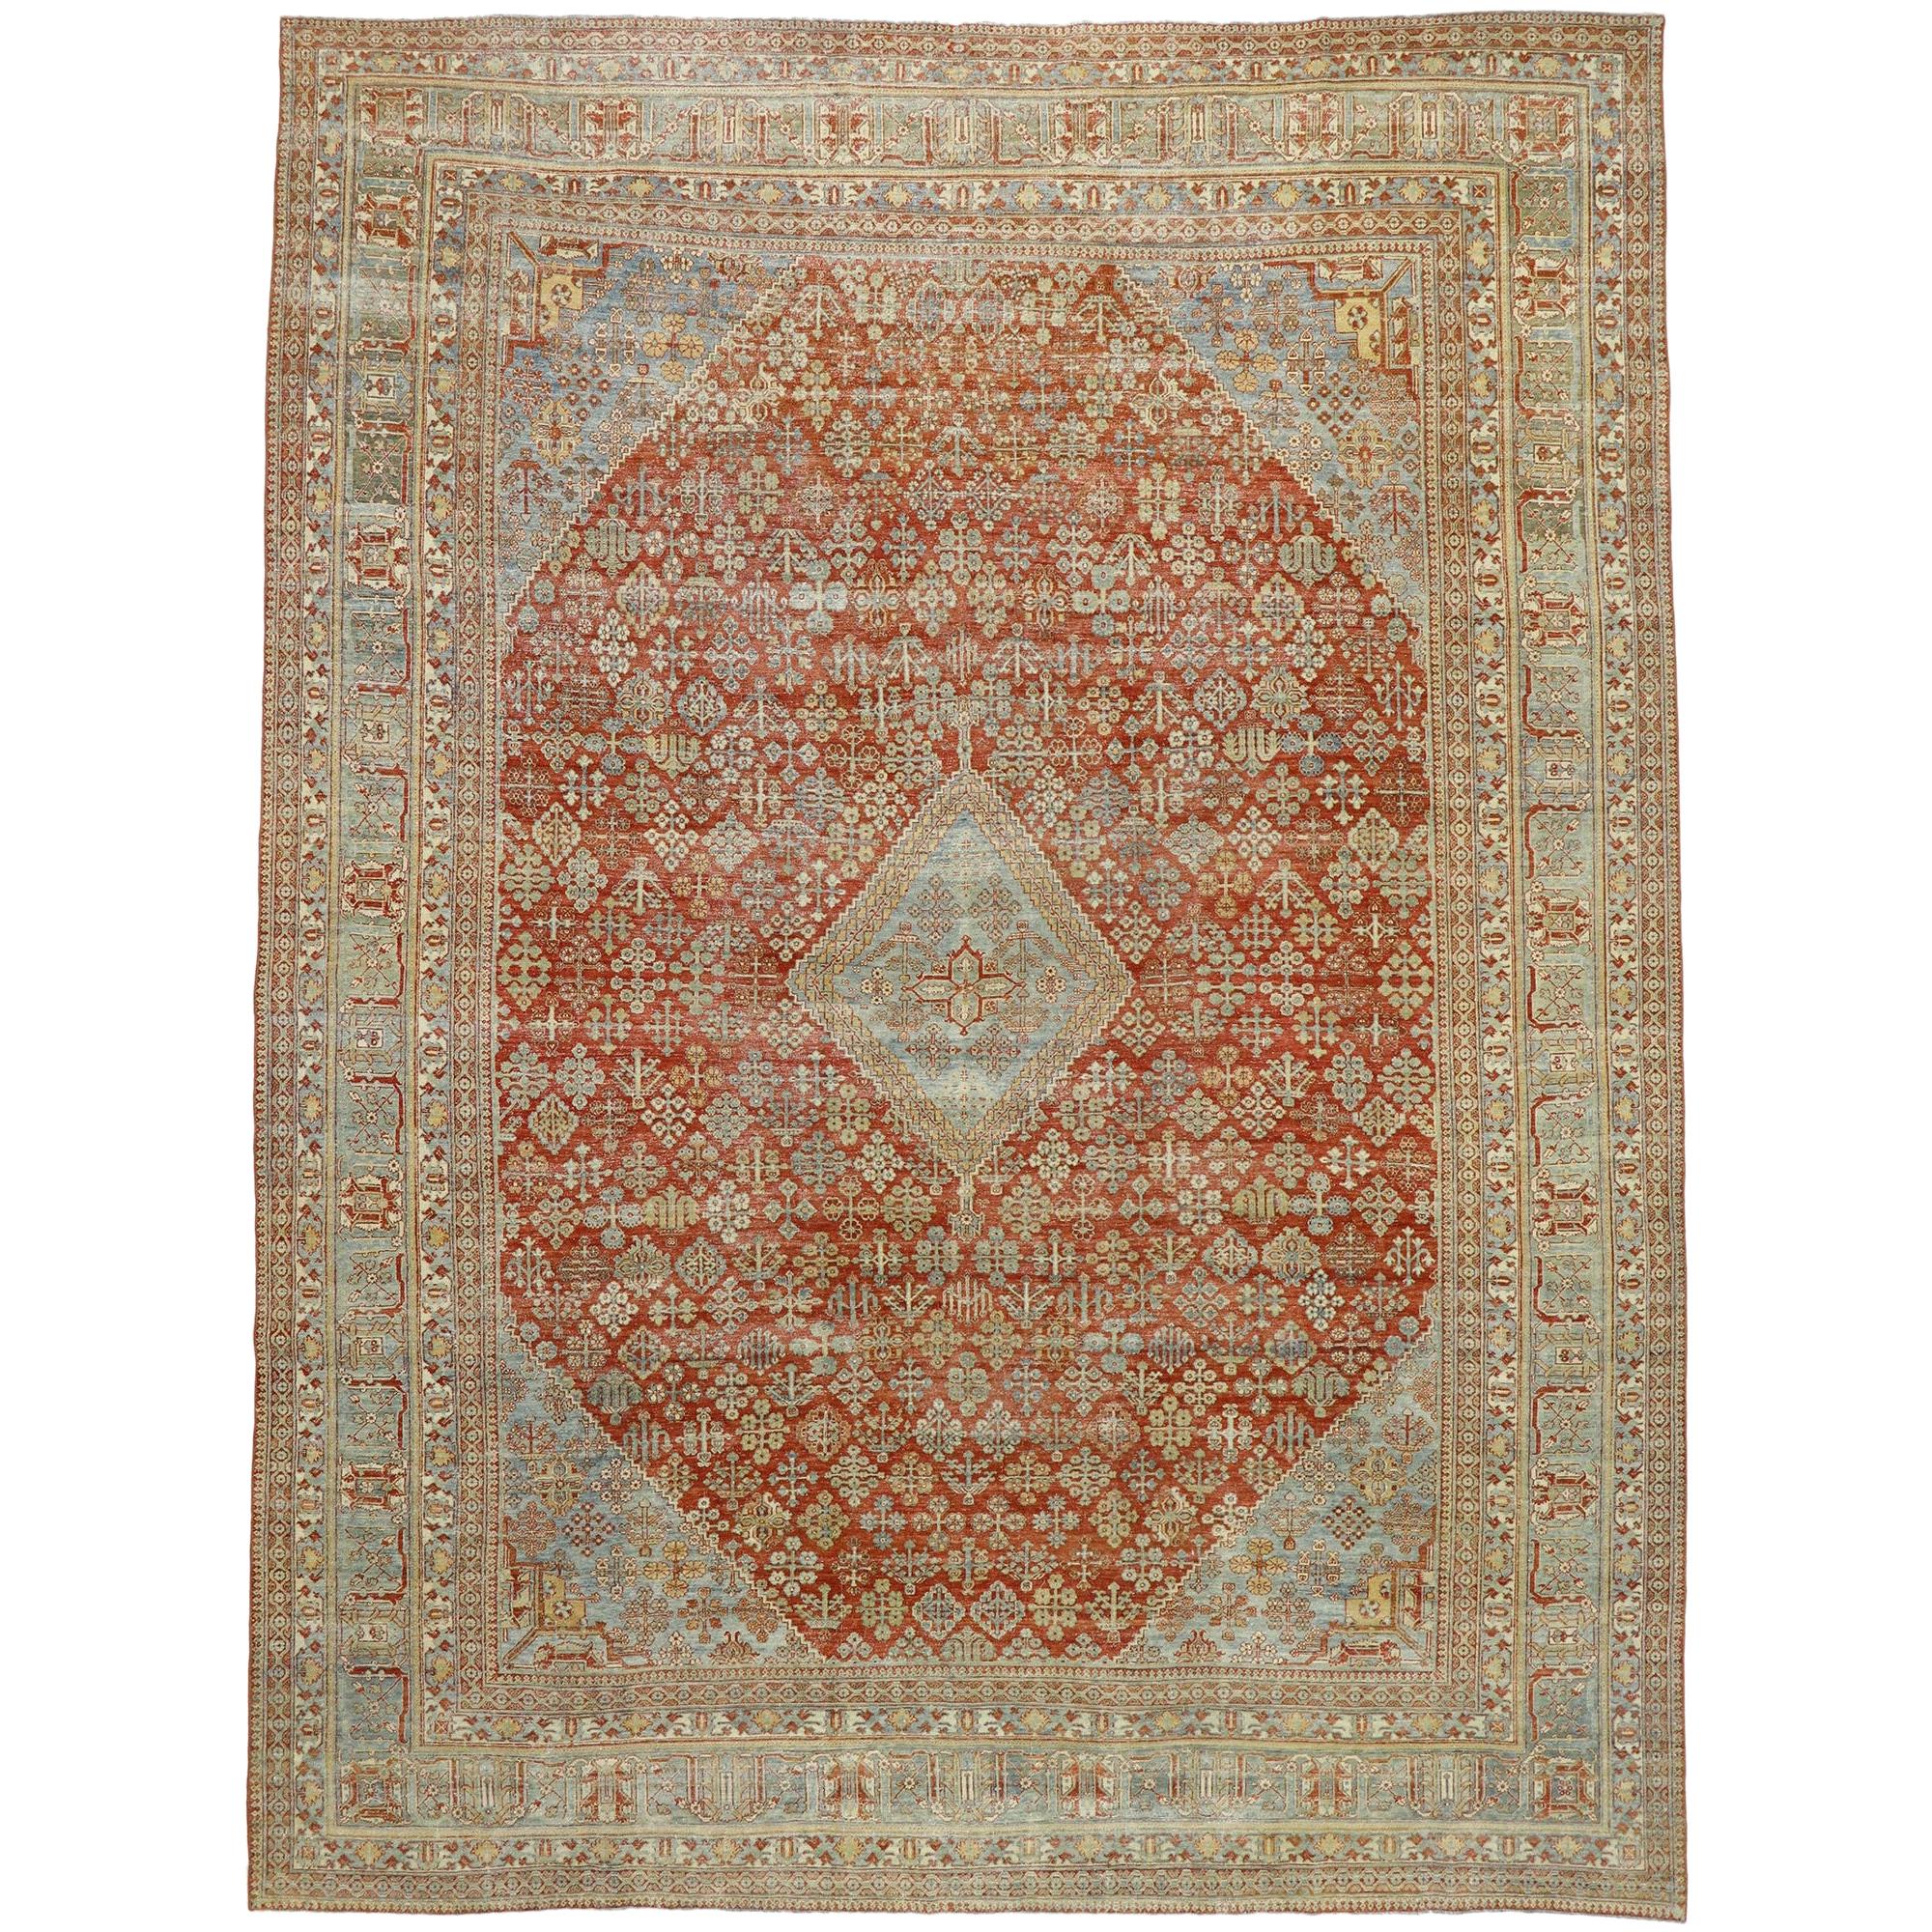 Distressed Antique Persian Joshegan Rug with Modern Rustic English Style For Sale